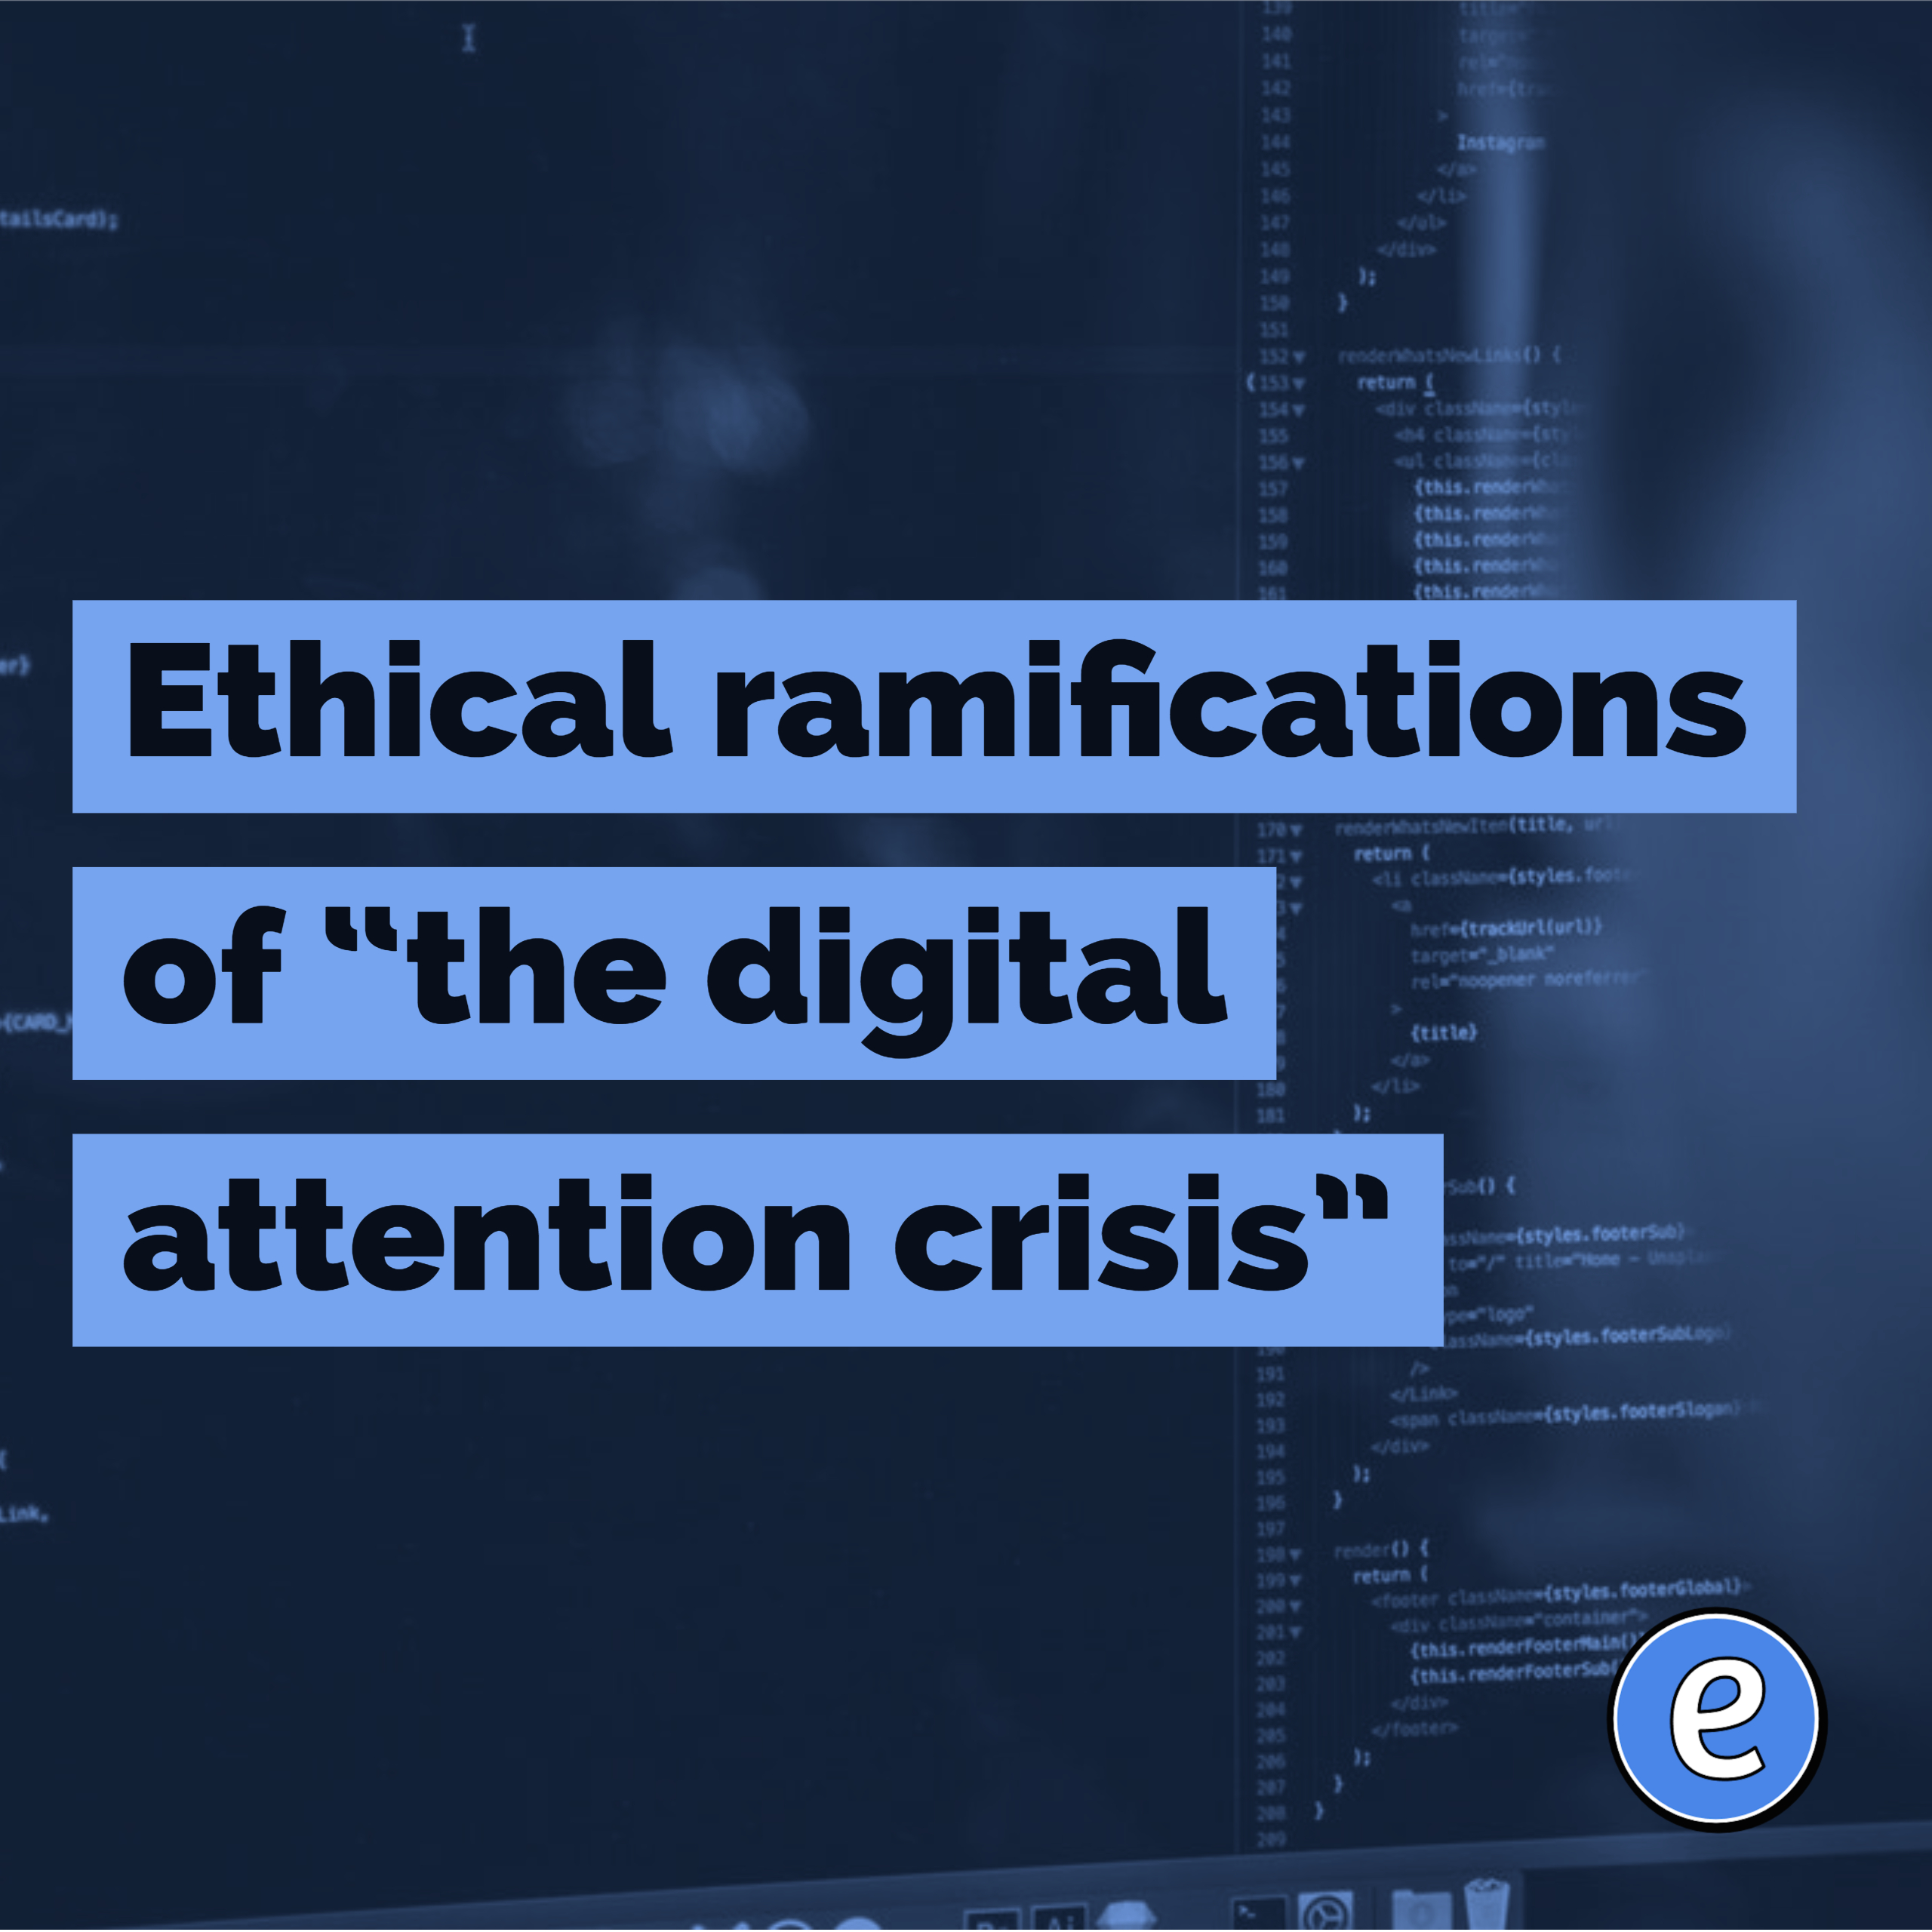 Ethical ramifications of “the digital attention crisis”